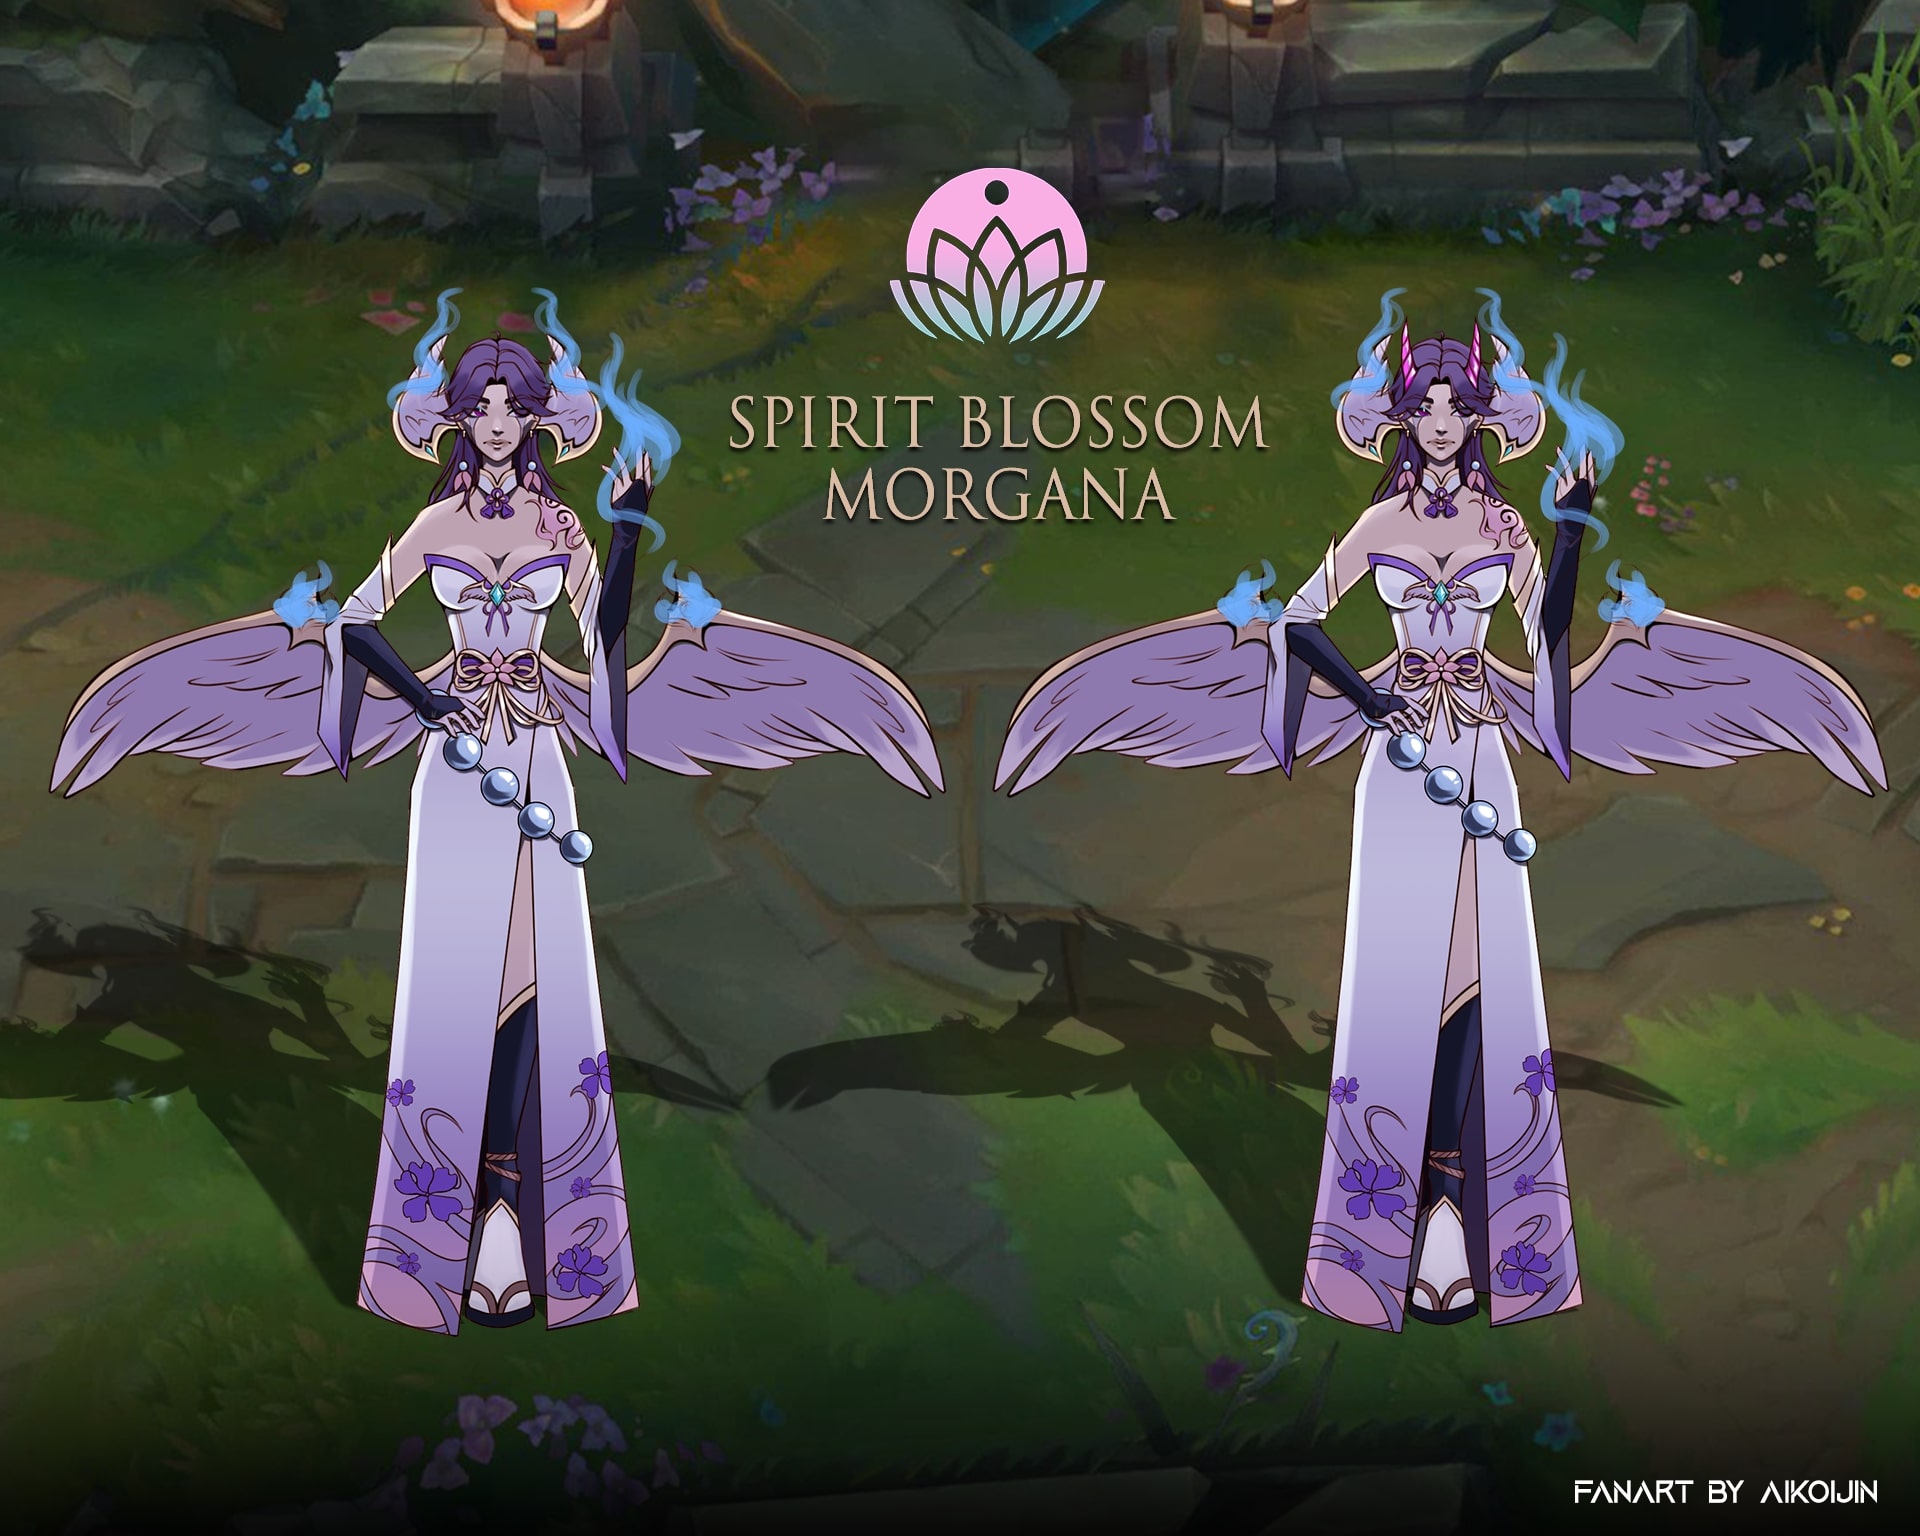 This was one of my first fan-made skin concepts I made for League of Legends and I decided to explore the Spirit Blossom Skinline that was based on the idea of the afterlife and a time where the dead visit their loved ones. Some core features of the skinline were Japanese apparel, cherry blossom motifs, and purple,blue,pink hues. || When concepting this concept, I wanted to give Morgana a standard kimono and push for the geisha look but later decided to change it and made it a bit more ornamented and follow the flow of her original dress as well as keeping the wings feathery but added spirit flames to make her more recognizable champion-wise.